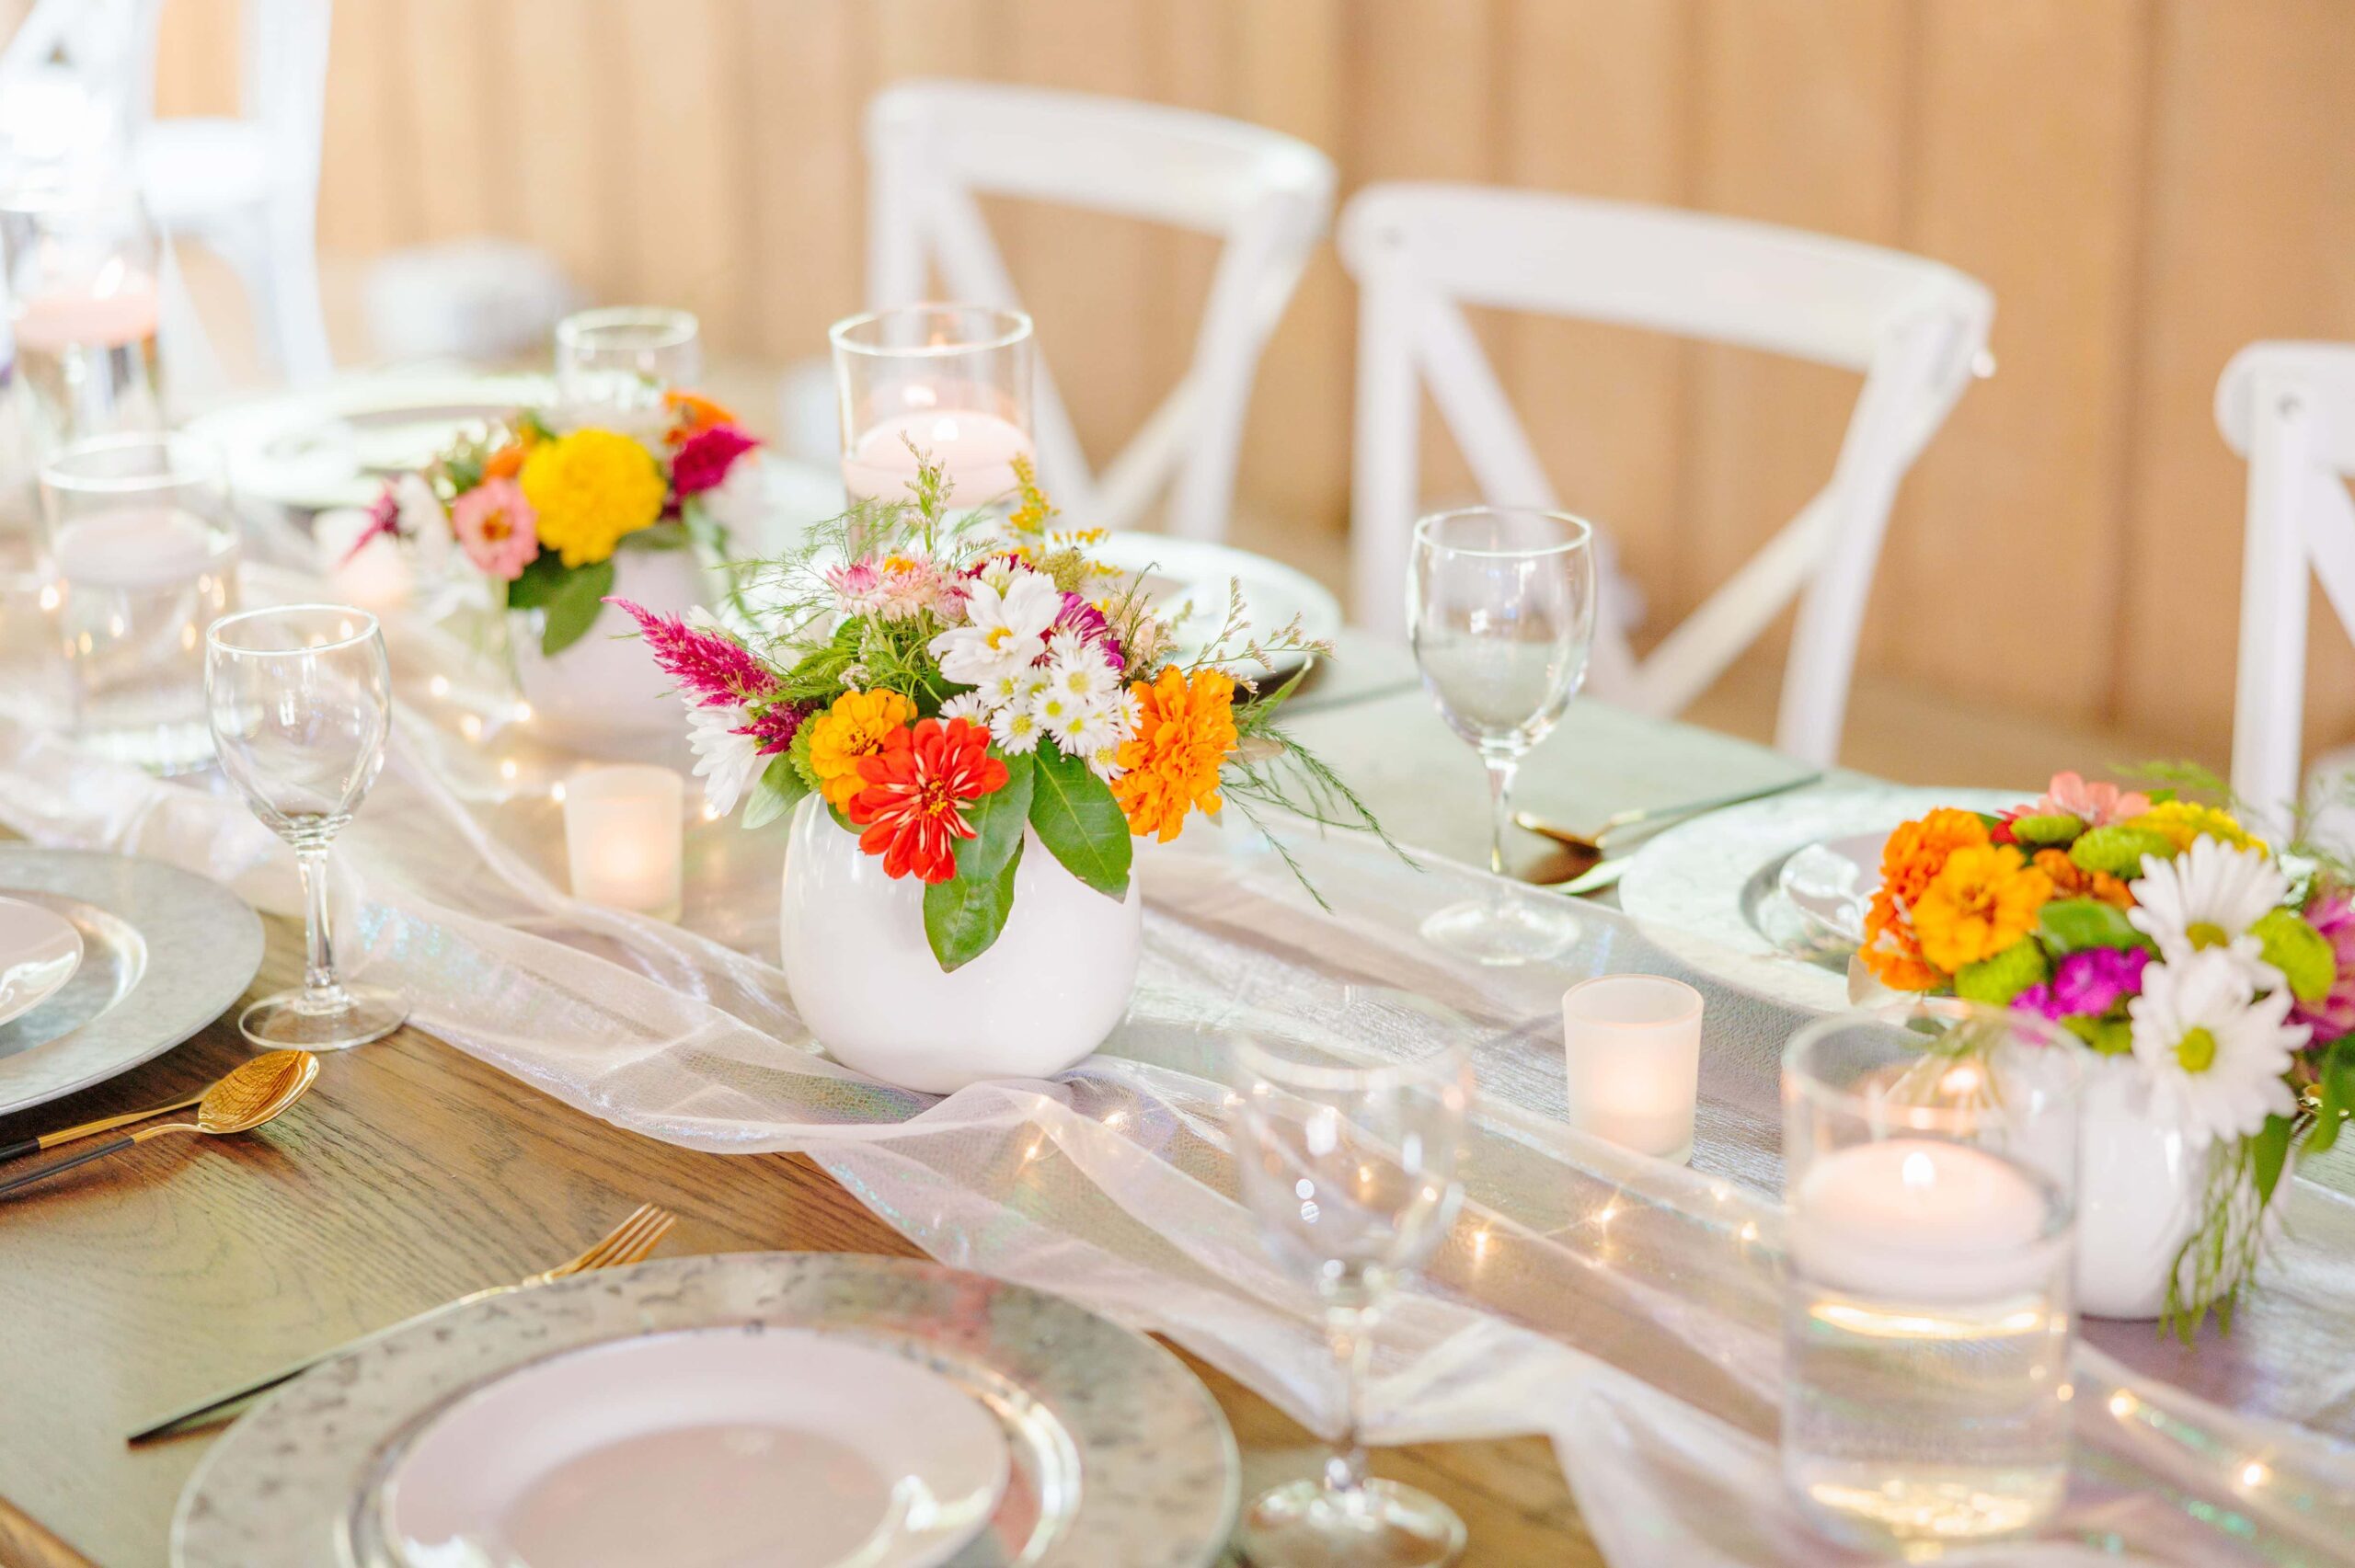 The table setting at this disco wedding had bright orange flowers and holographic fabric running down the middle.